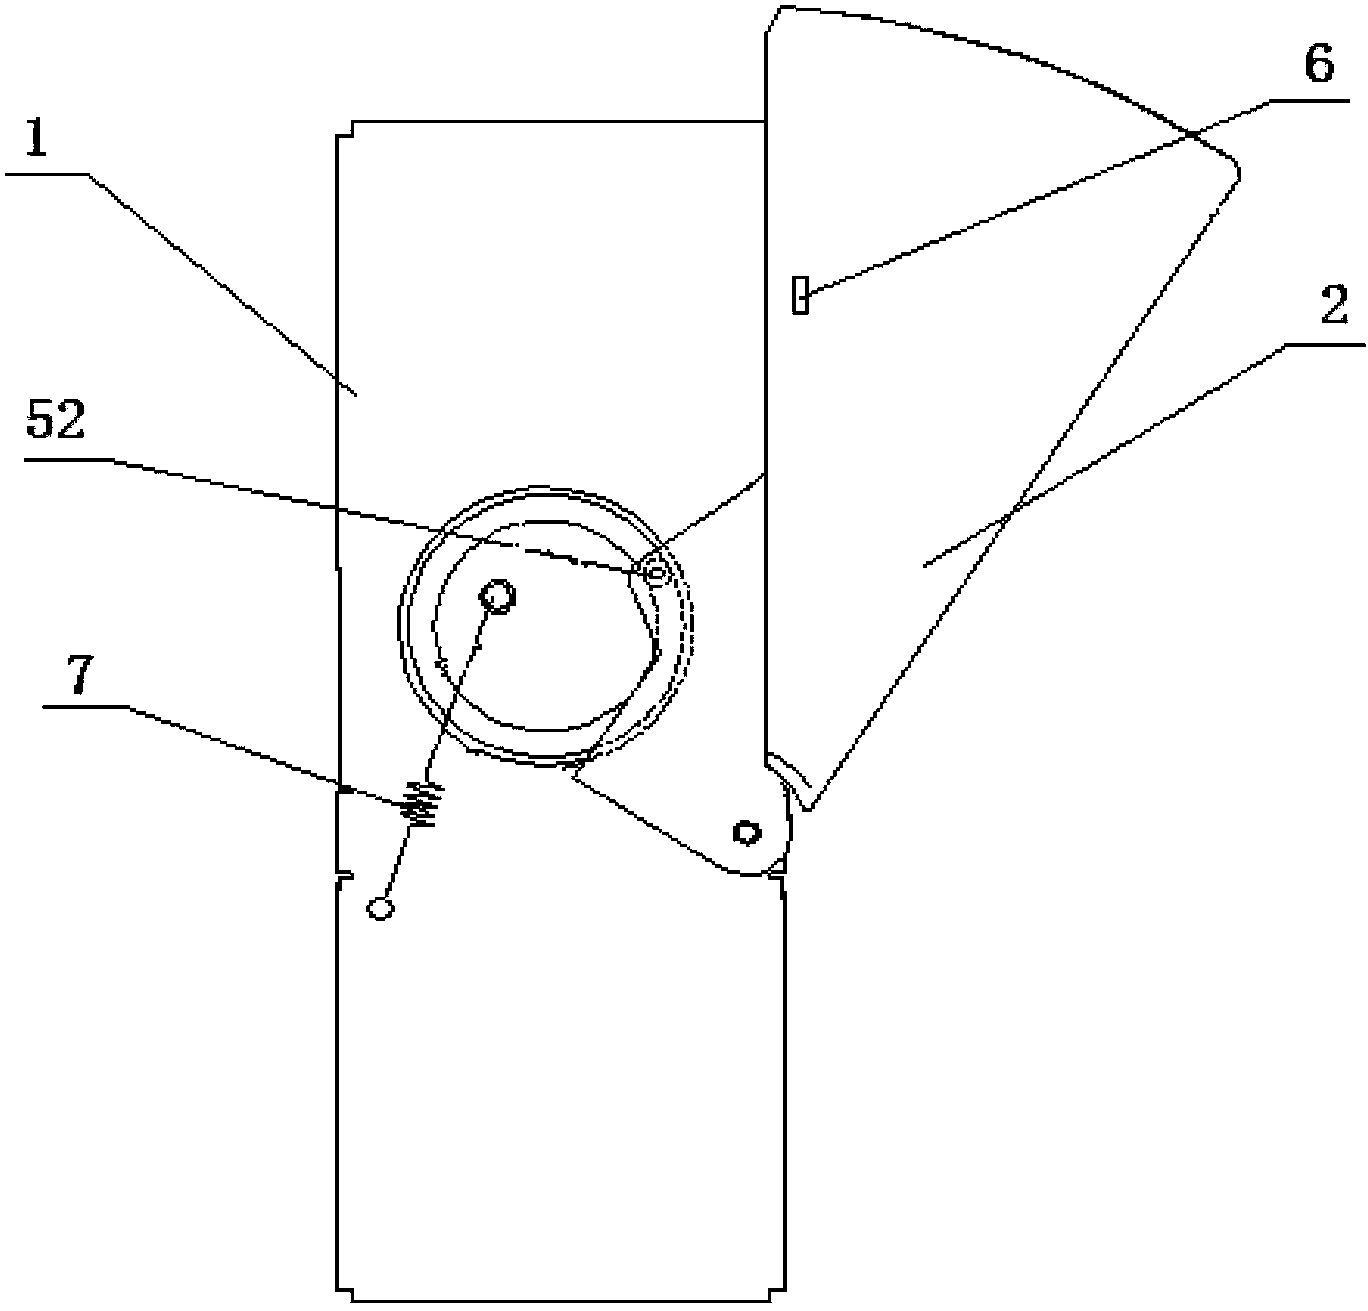 Gate driven by cam structure